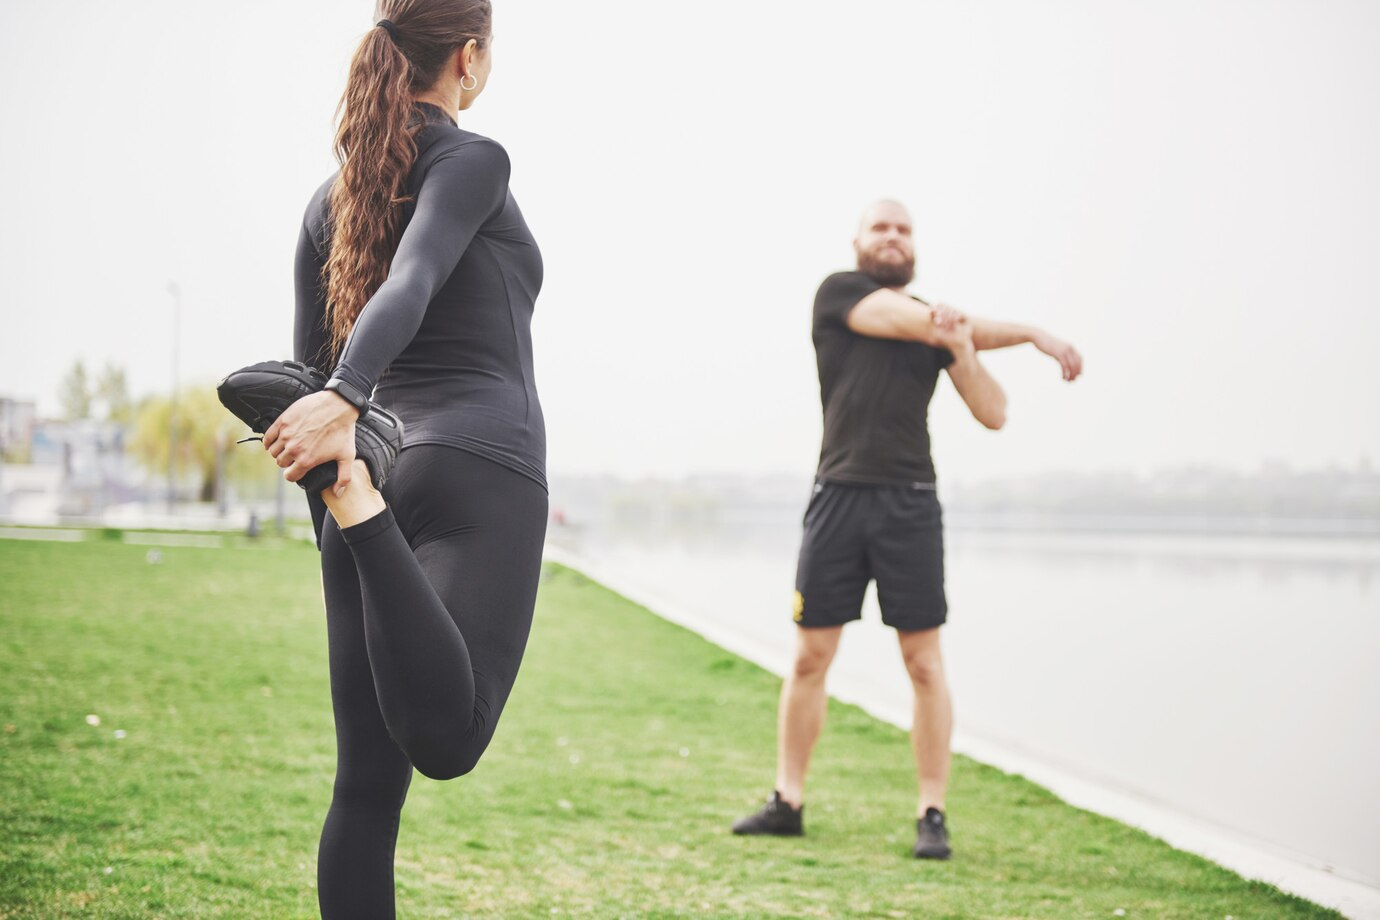 Therapy and Rehabilitation fitness couple stretching outdoors park near water young bearded man woman exercising together morning 146671 14790